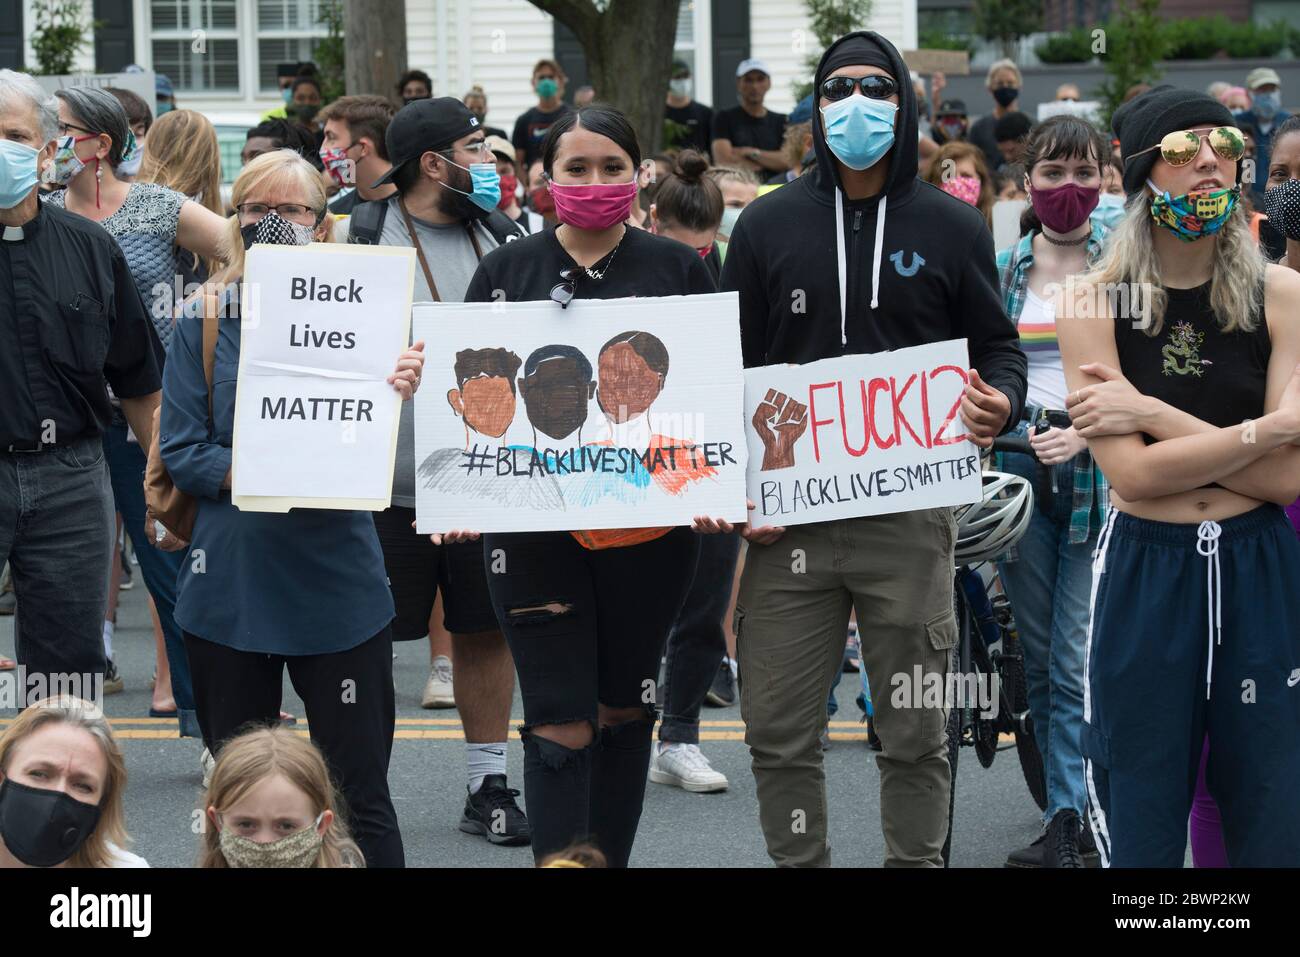 Bethesda,MD, June 2, 2020,USA: A rally organized by high school students brought thousands of  protestors gather in Bethesda, MD, a suburb near Washin Stock Photo